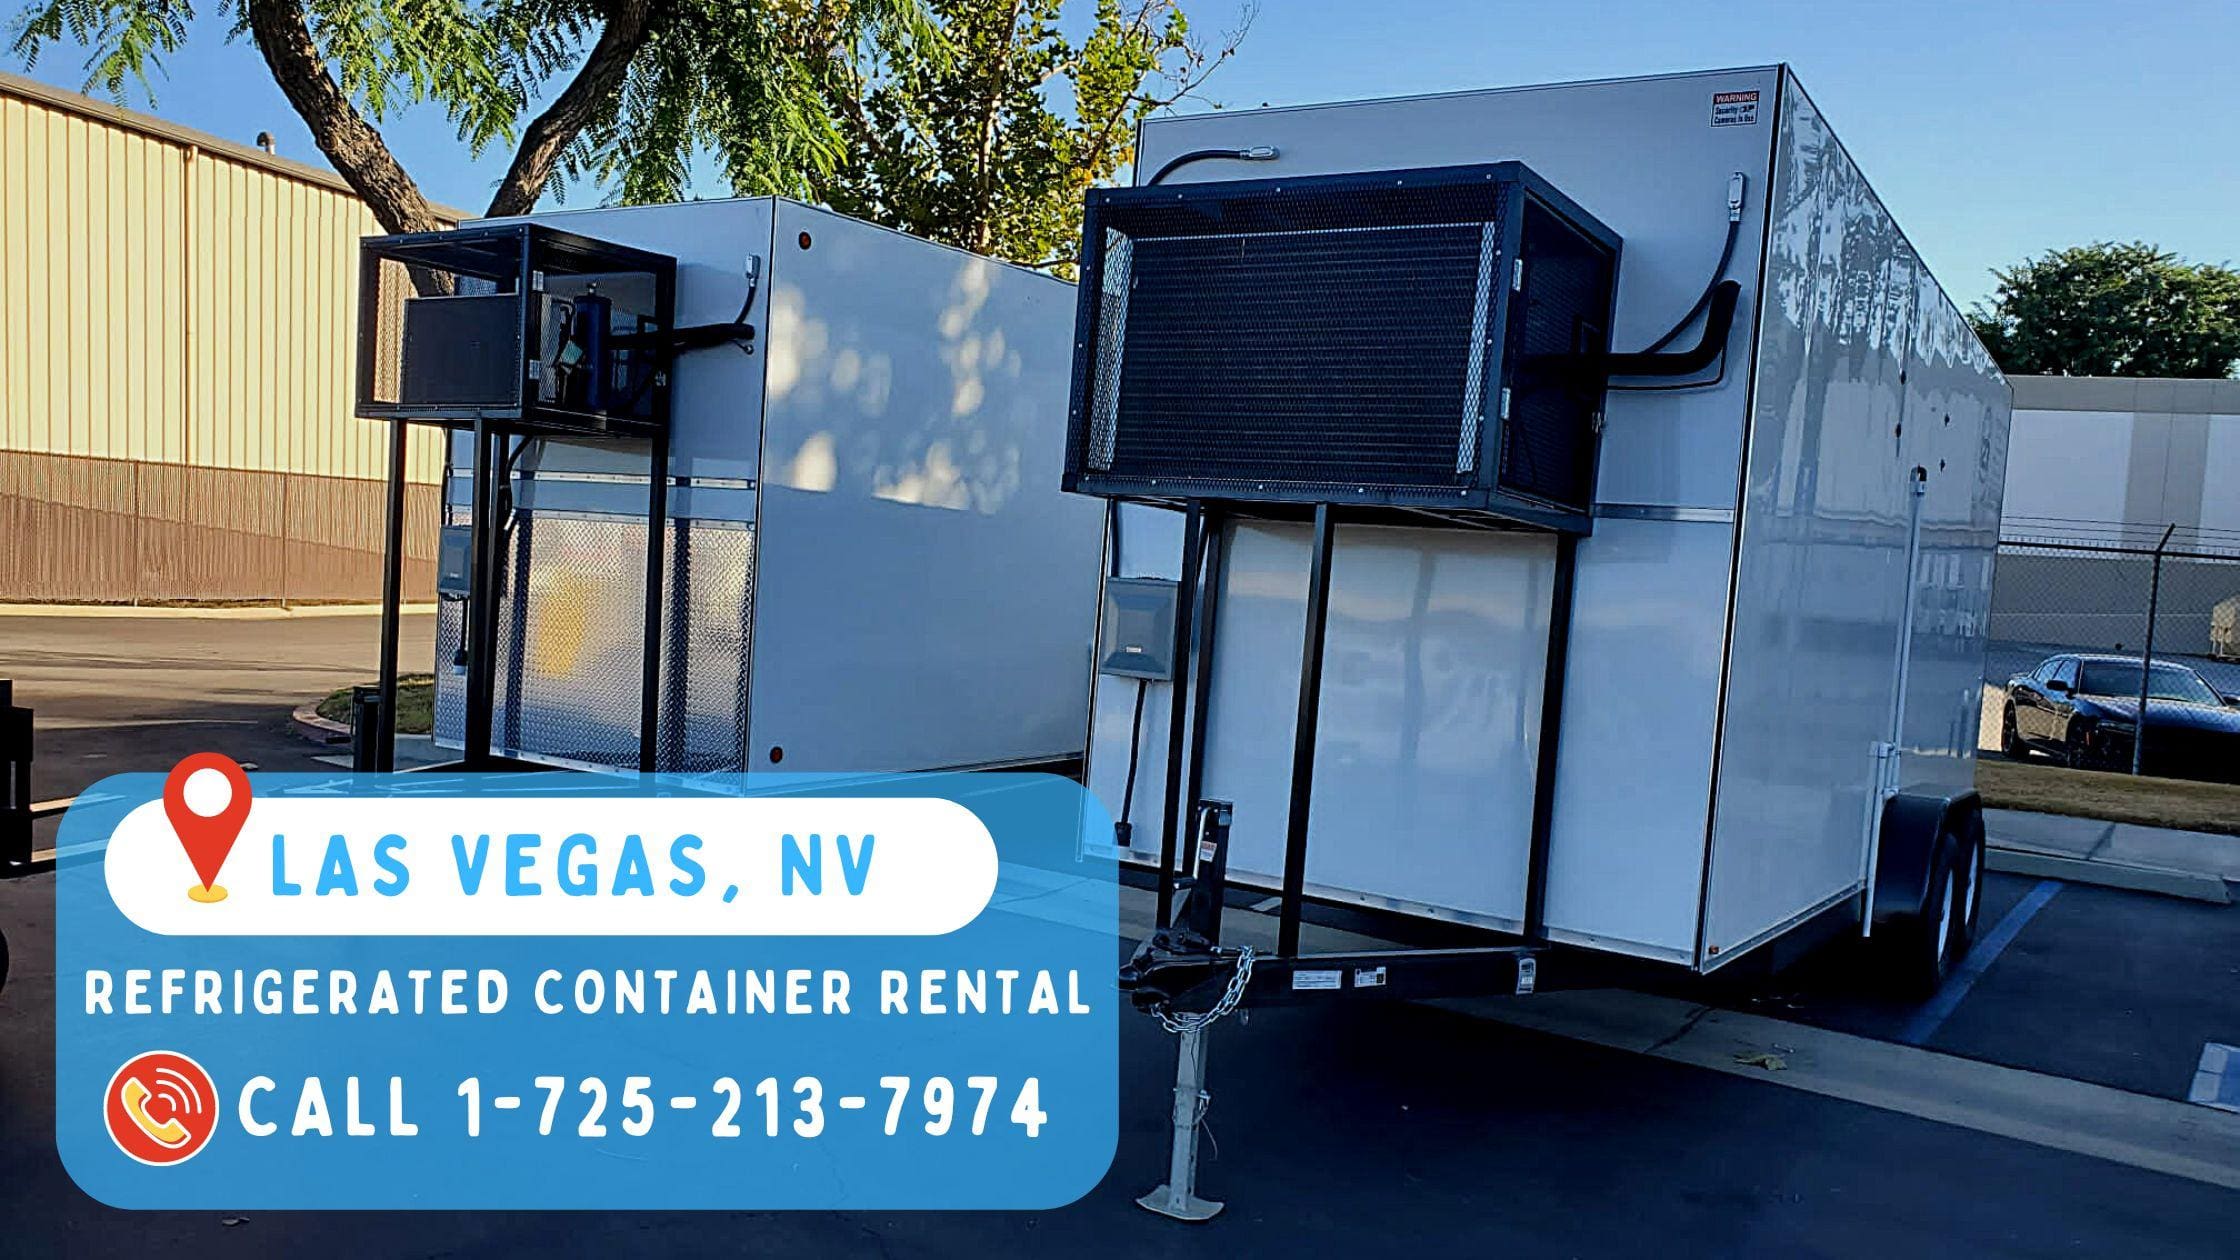 Refrigerated Container Rental in Las Vegas